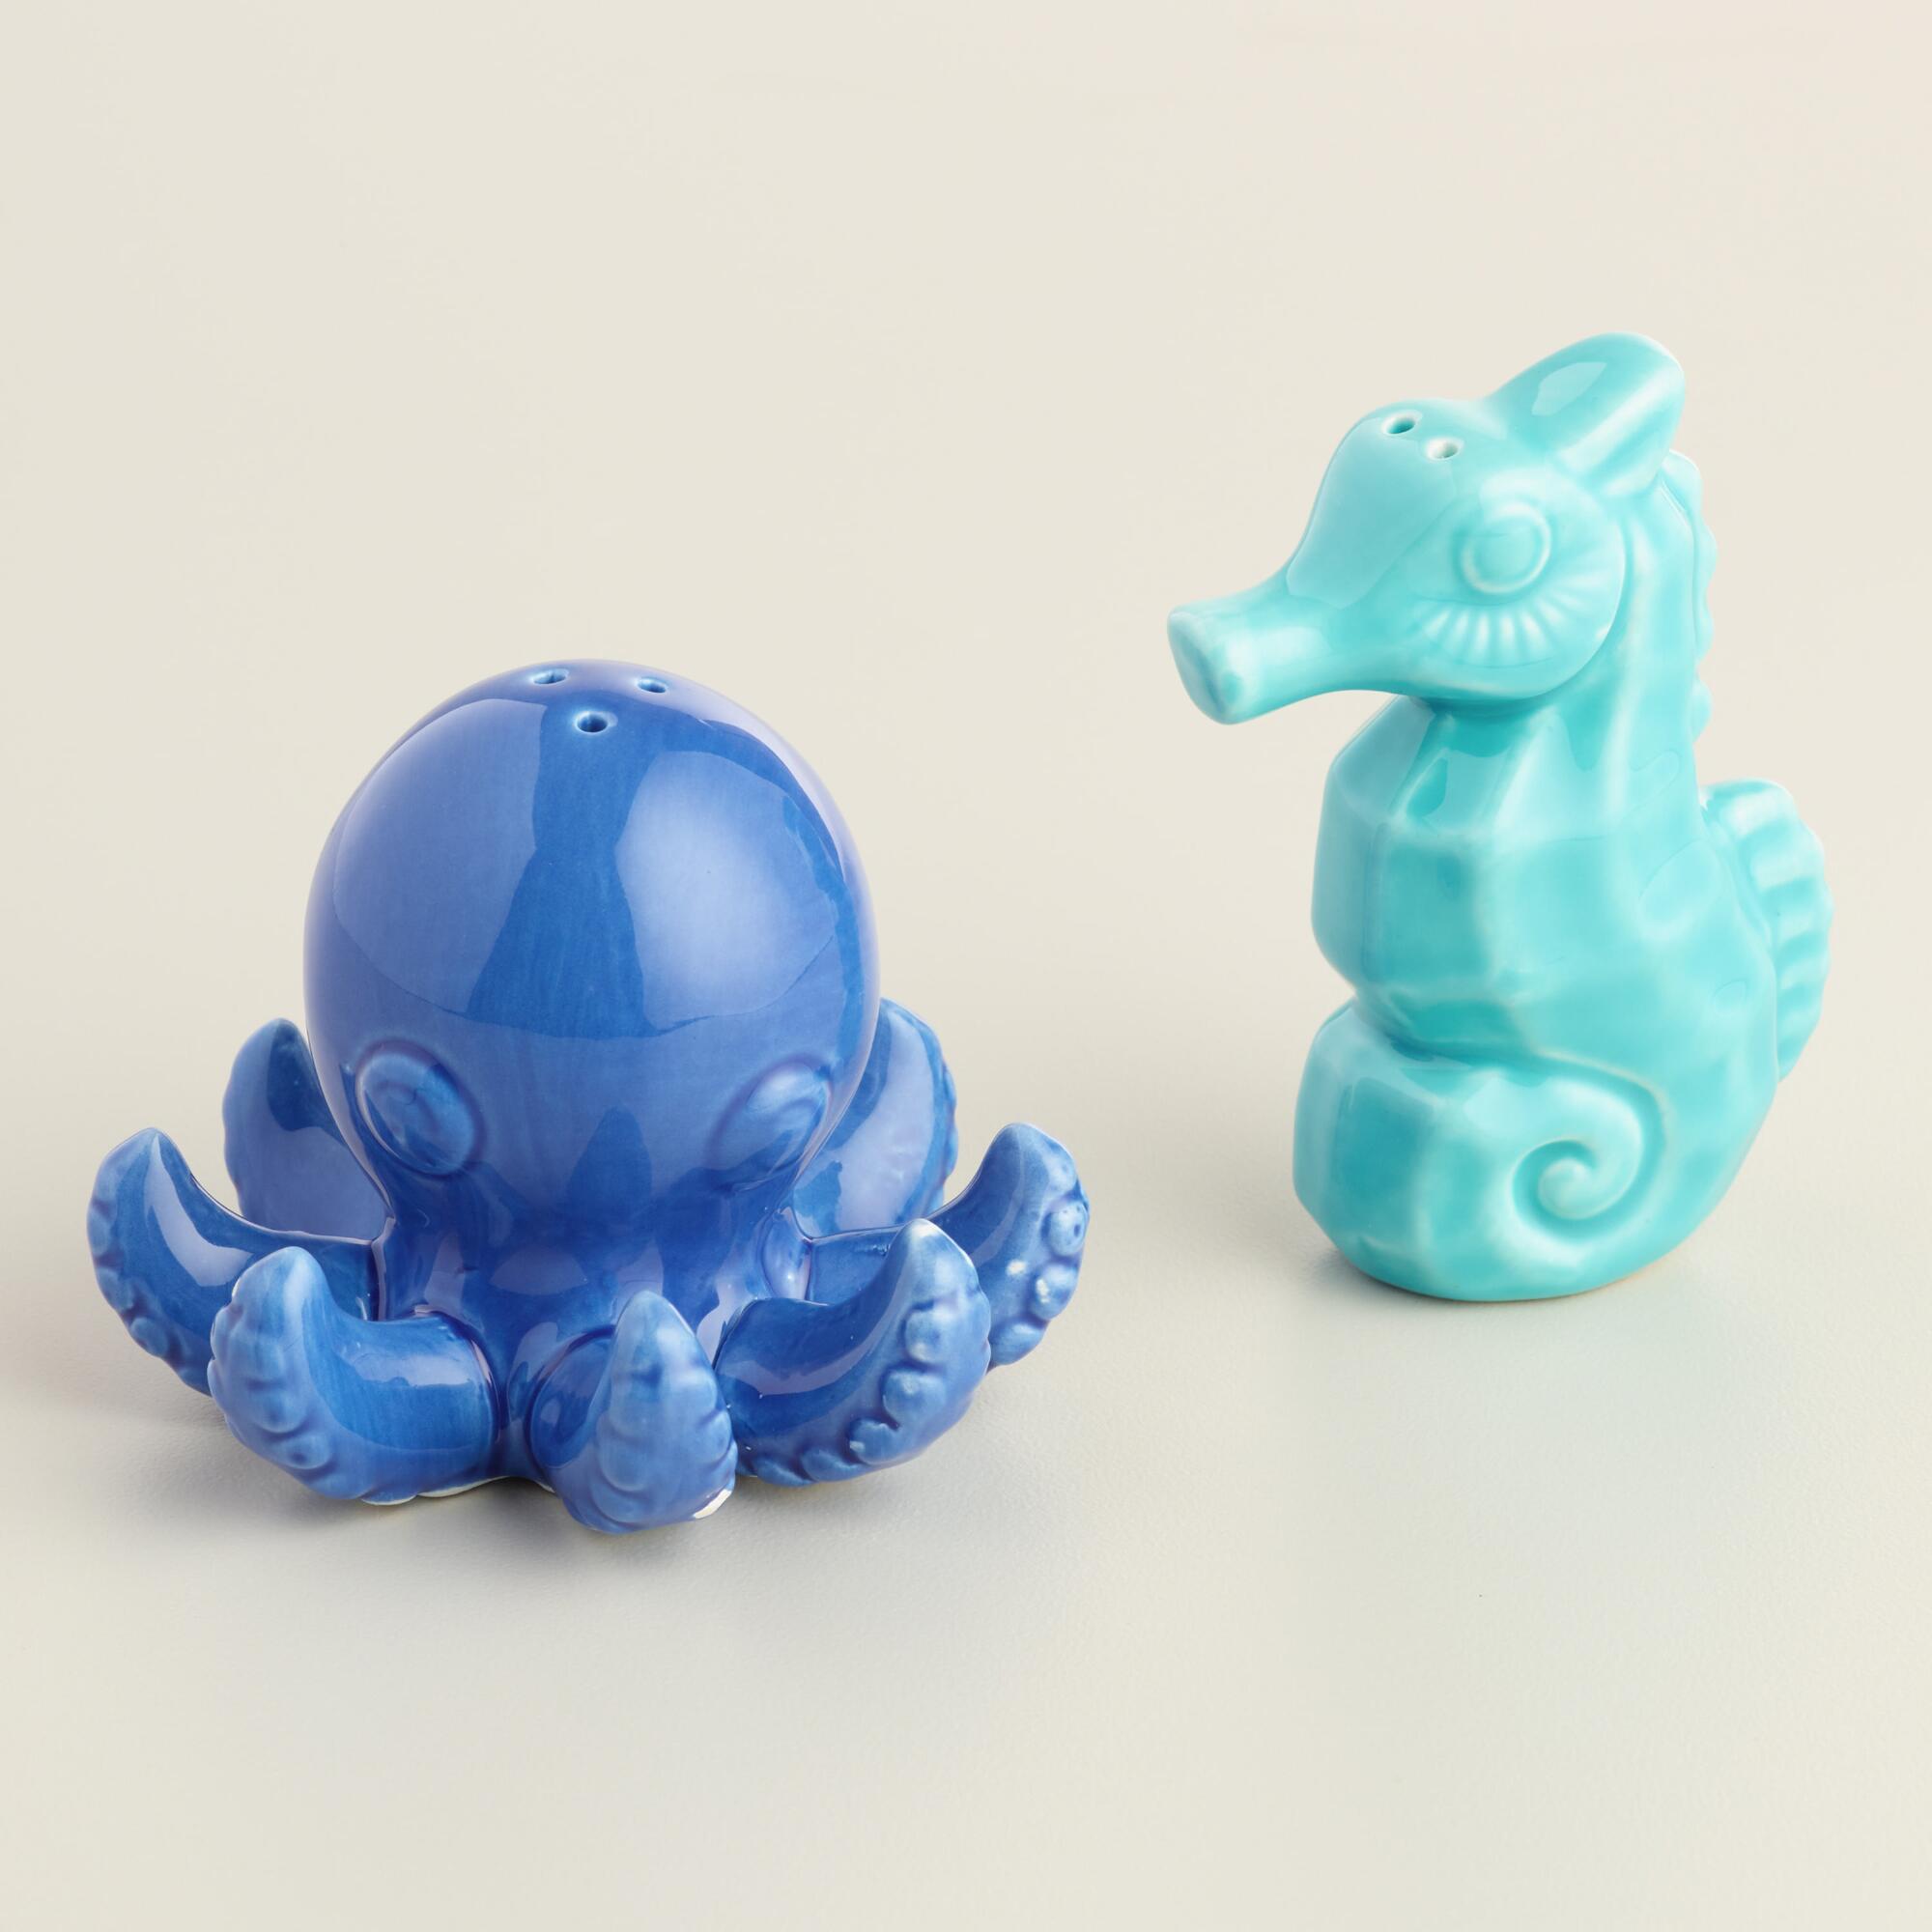 Octopus and Seahorse Salt and Pepper Shaker Set